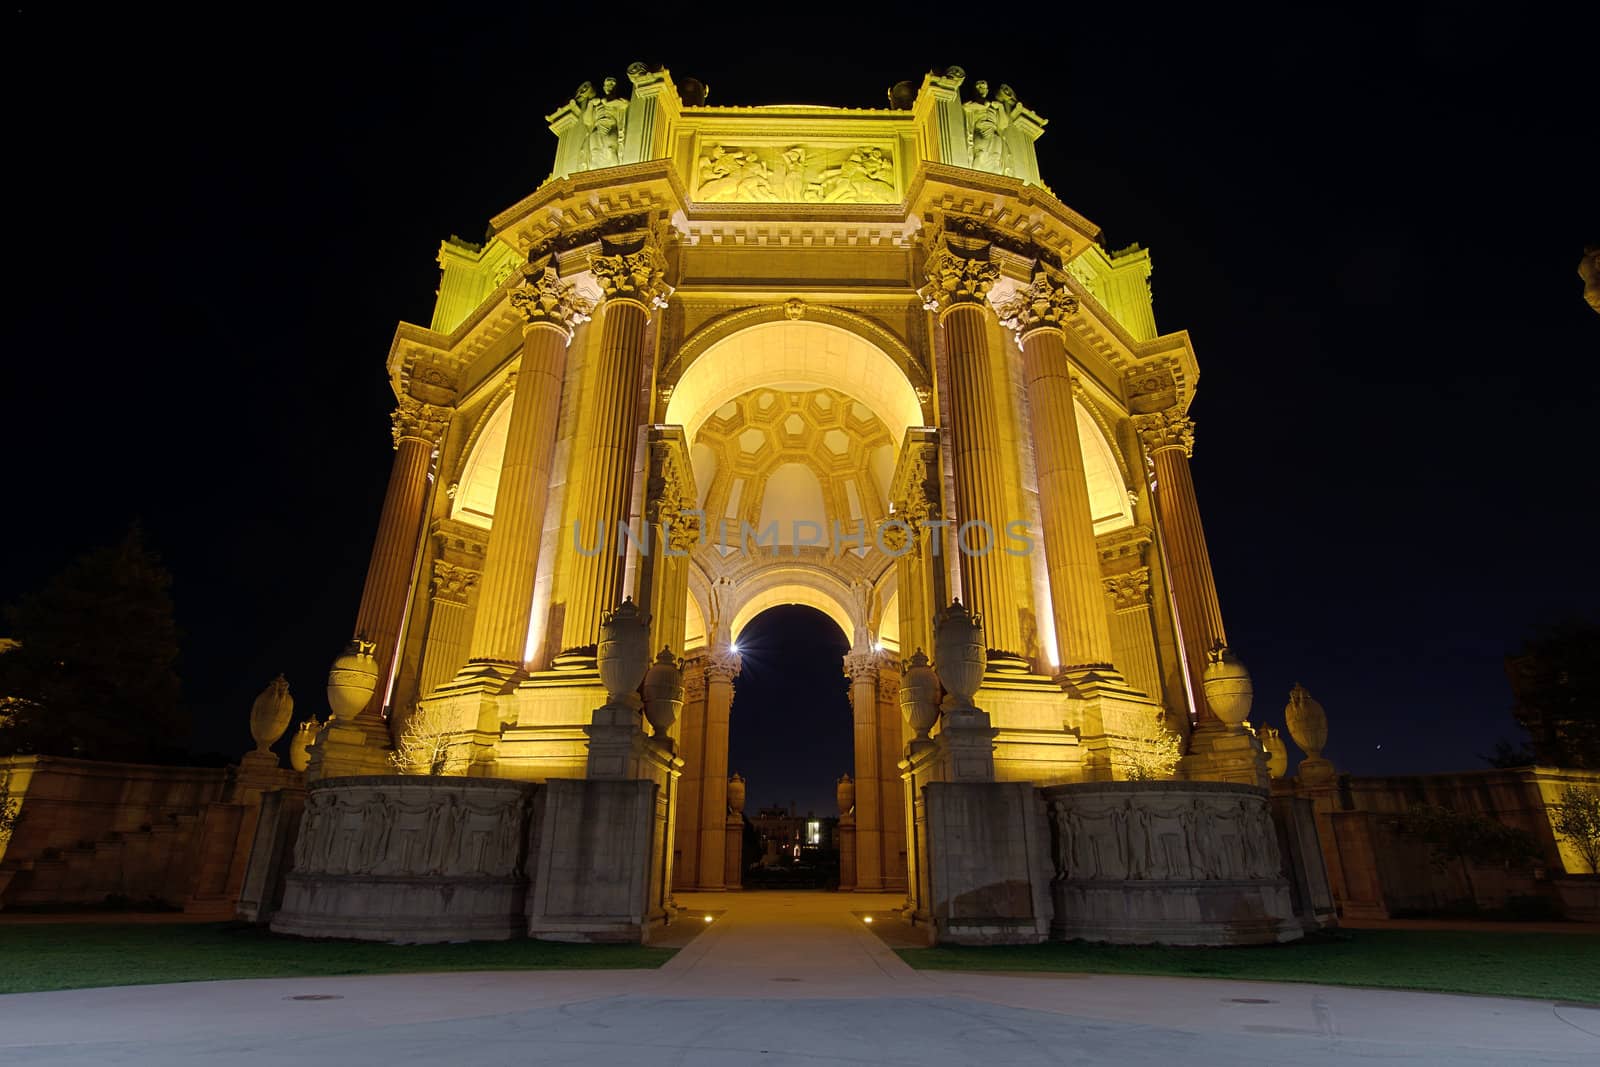 San Francisco Palace of Fine Arts Dome Monument Structure at Night